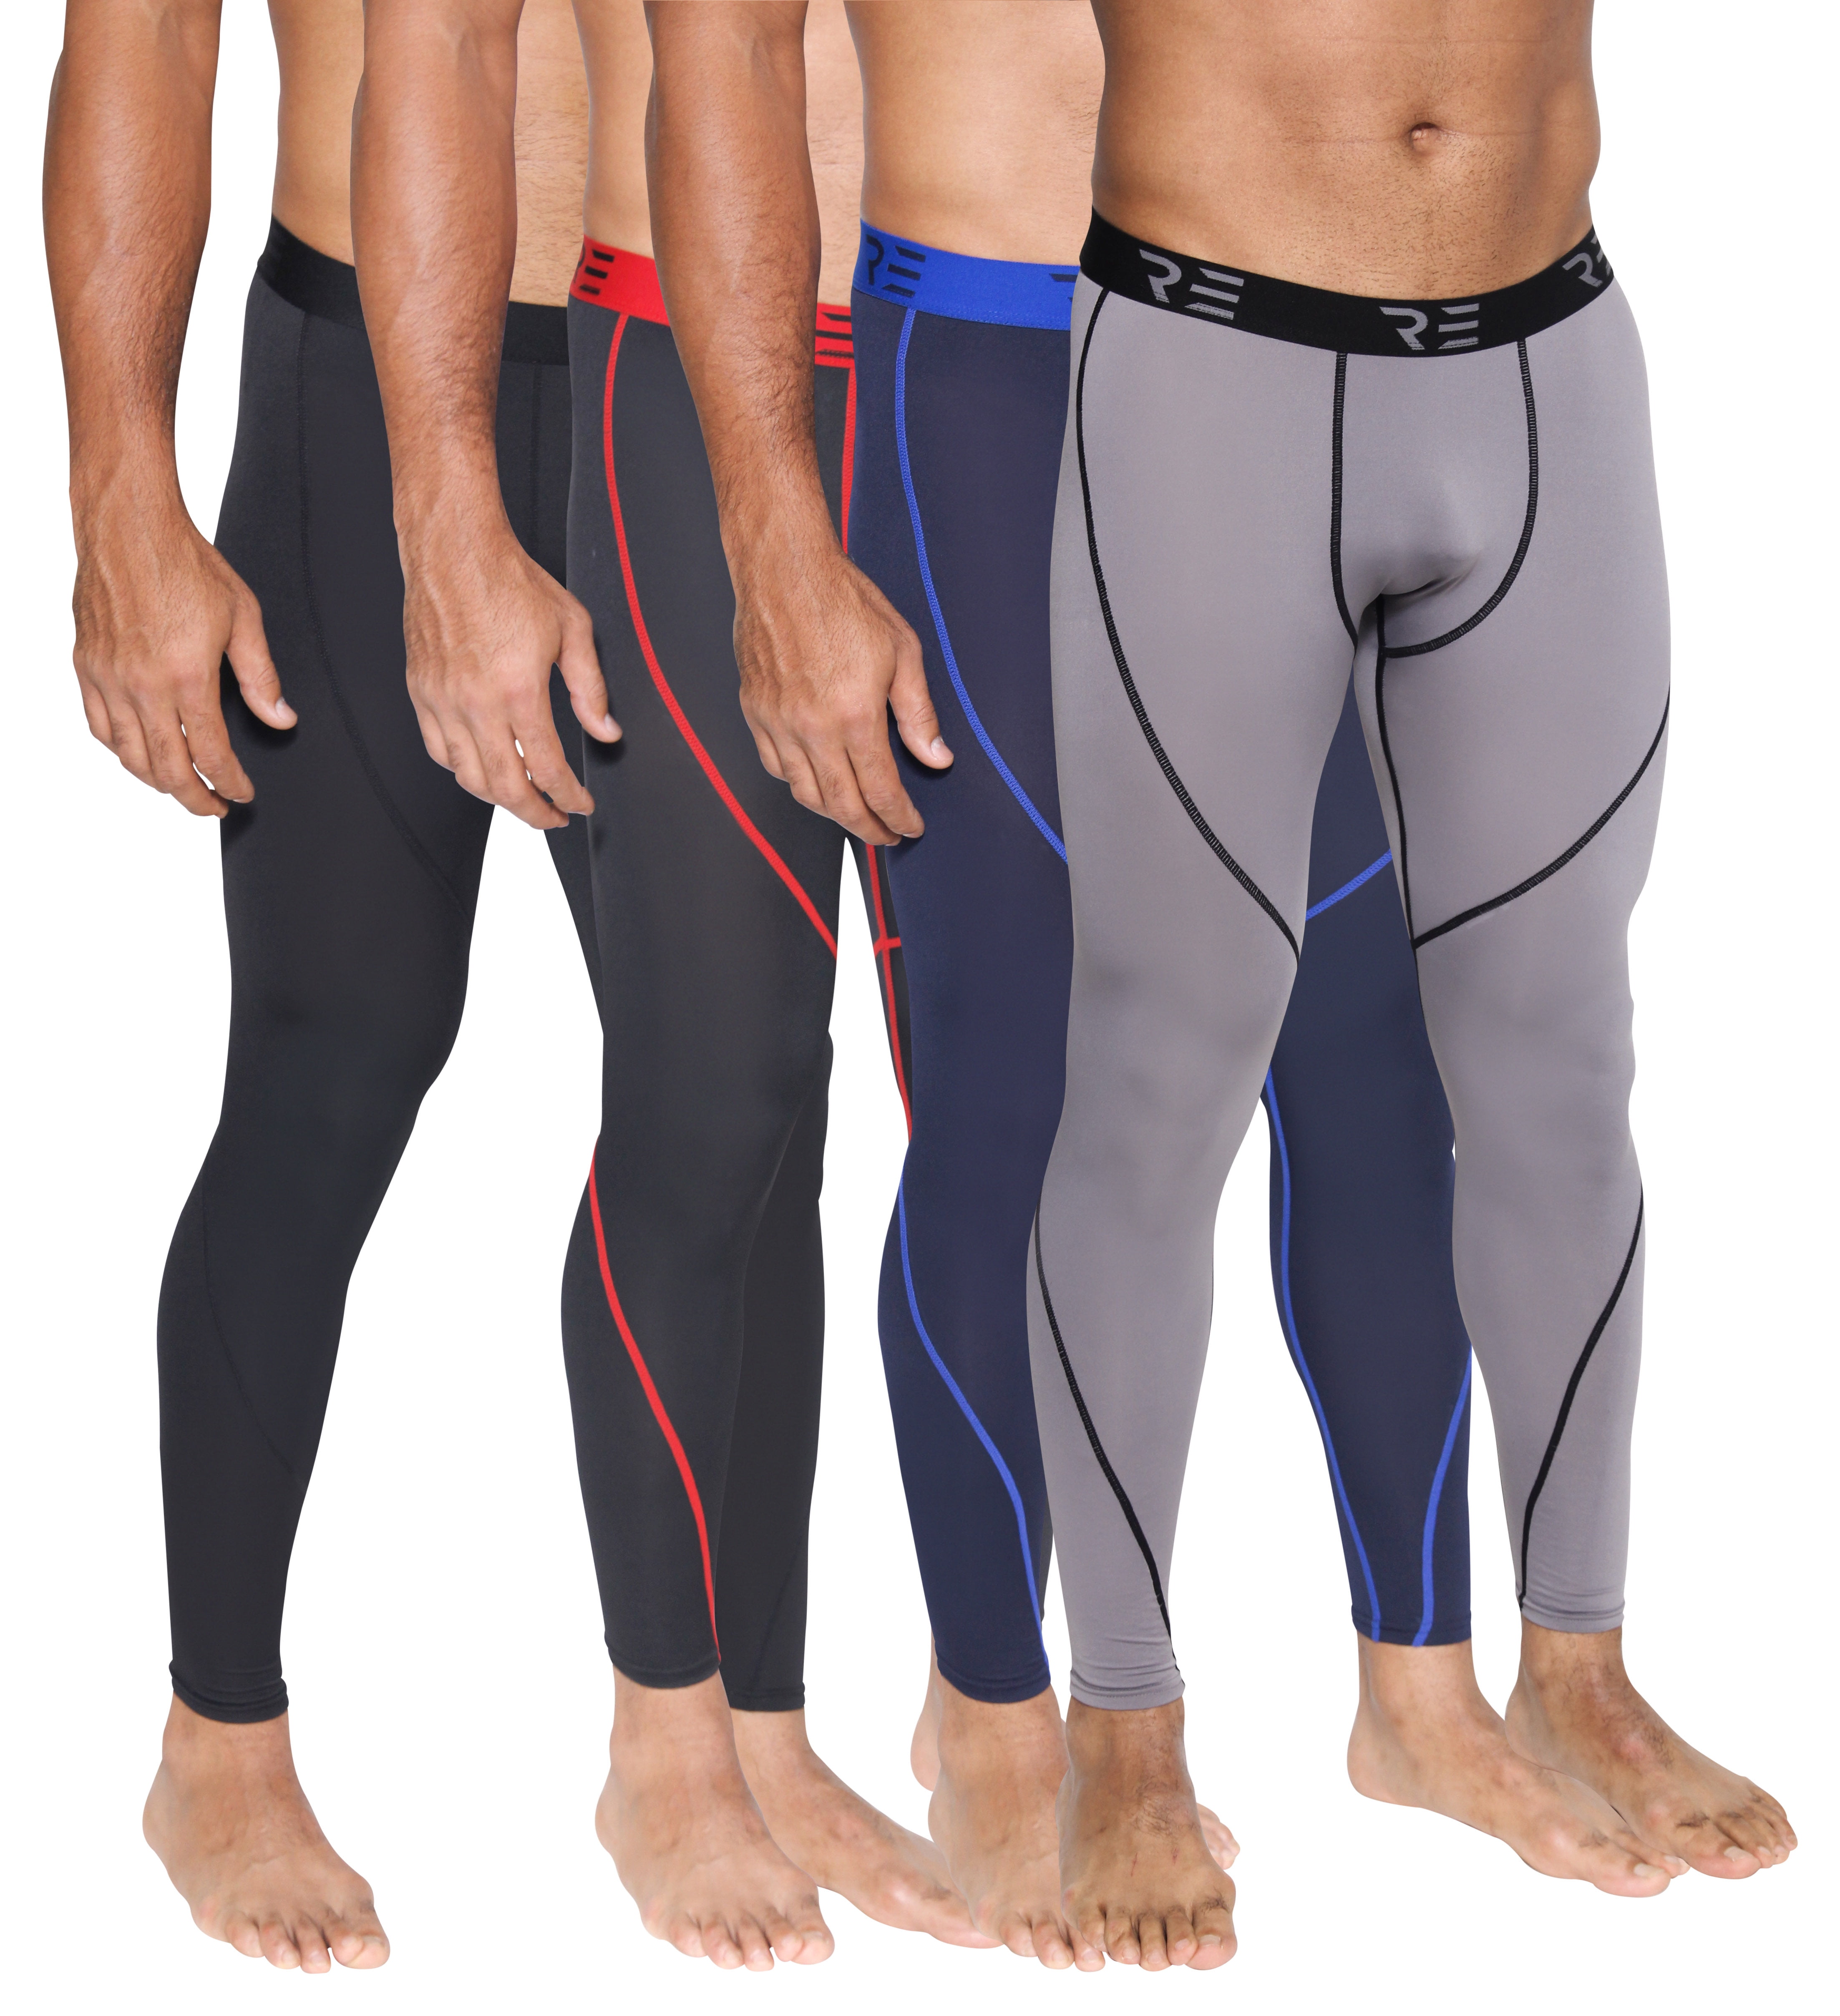 Men's Compression Legging Athletic Workout Bottoms Base layers Cool Dry Bottoms 